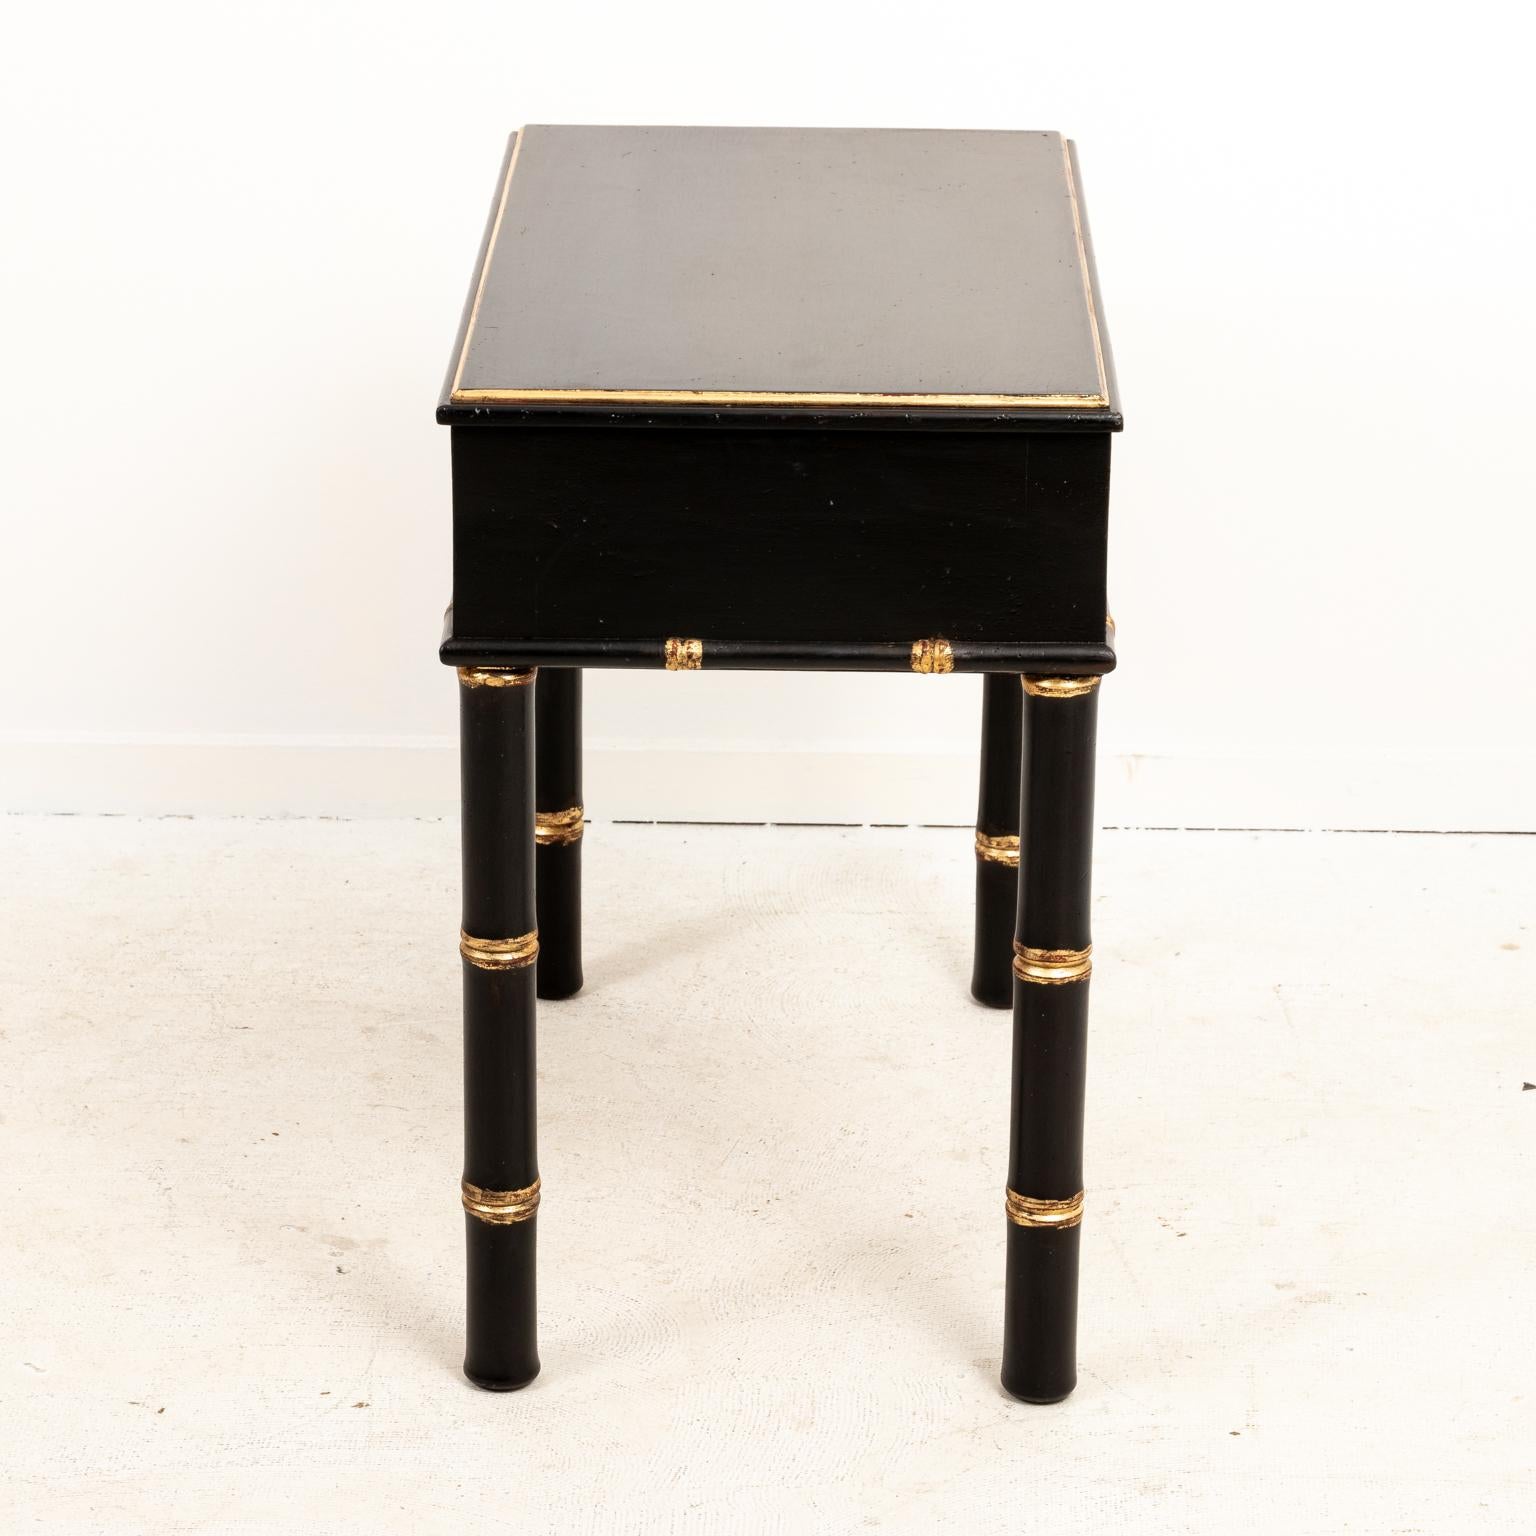 Black and gold Hollywood Regency style faux bamboo side table with one drawer on turned faux bamboo legs, circa 1970s. Made in the United States. Please note of wear consistent with age including minor paint loss.